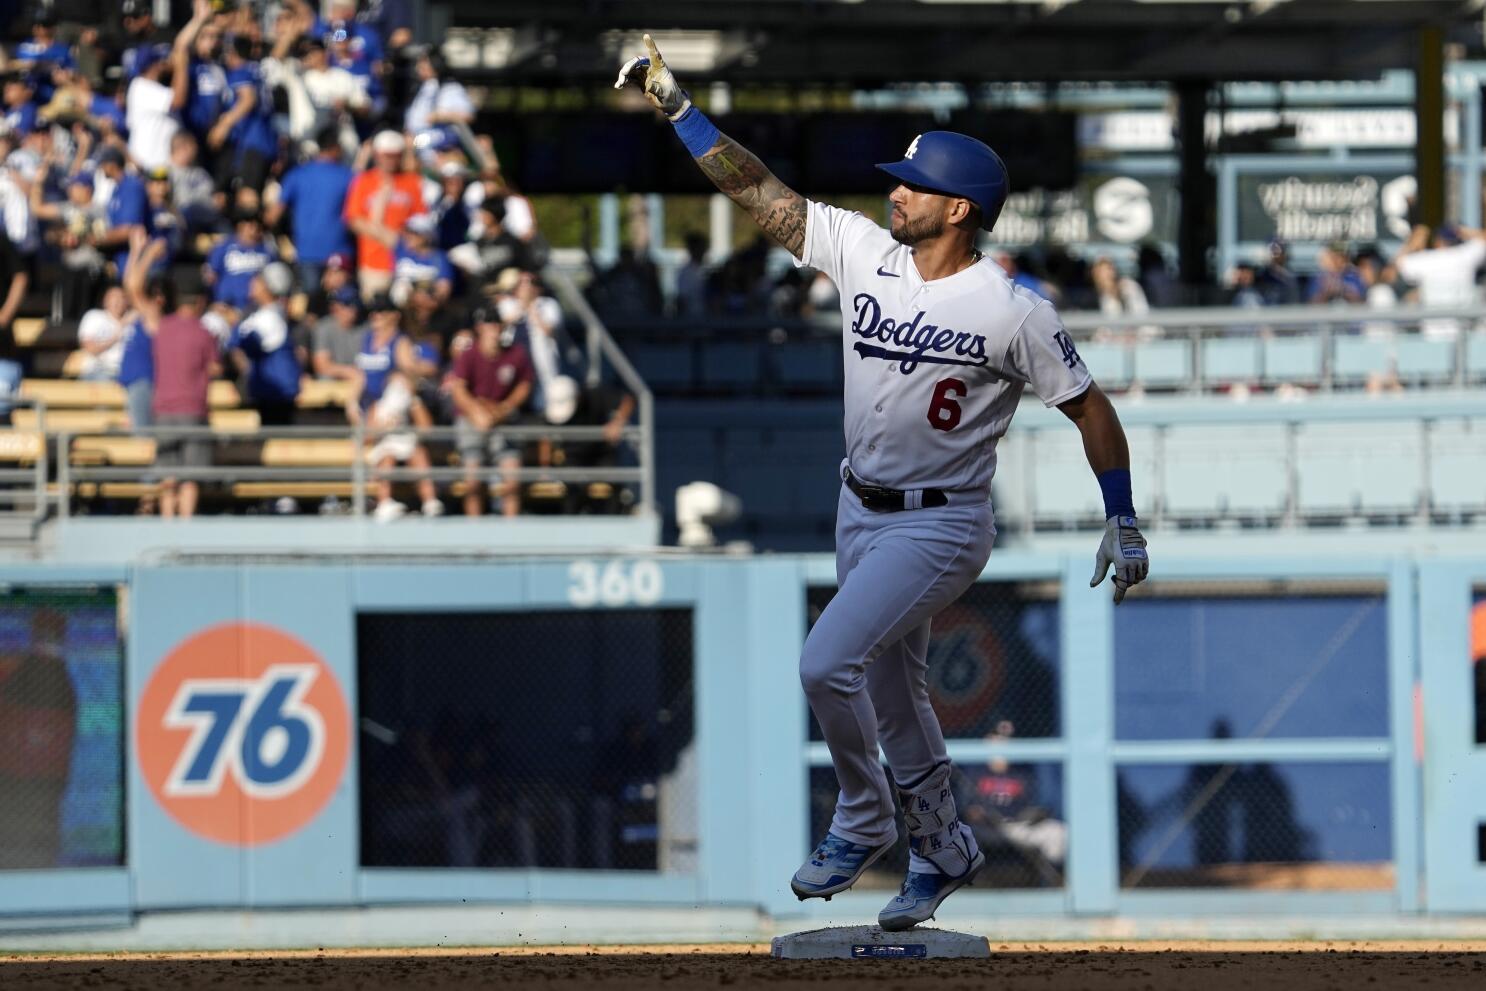 Greatest Dodgers Home Runs of All Time! 35 Most Iconic Home Runs